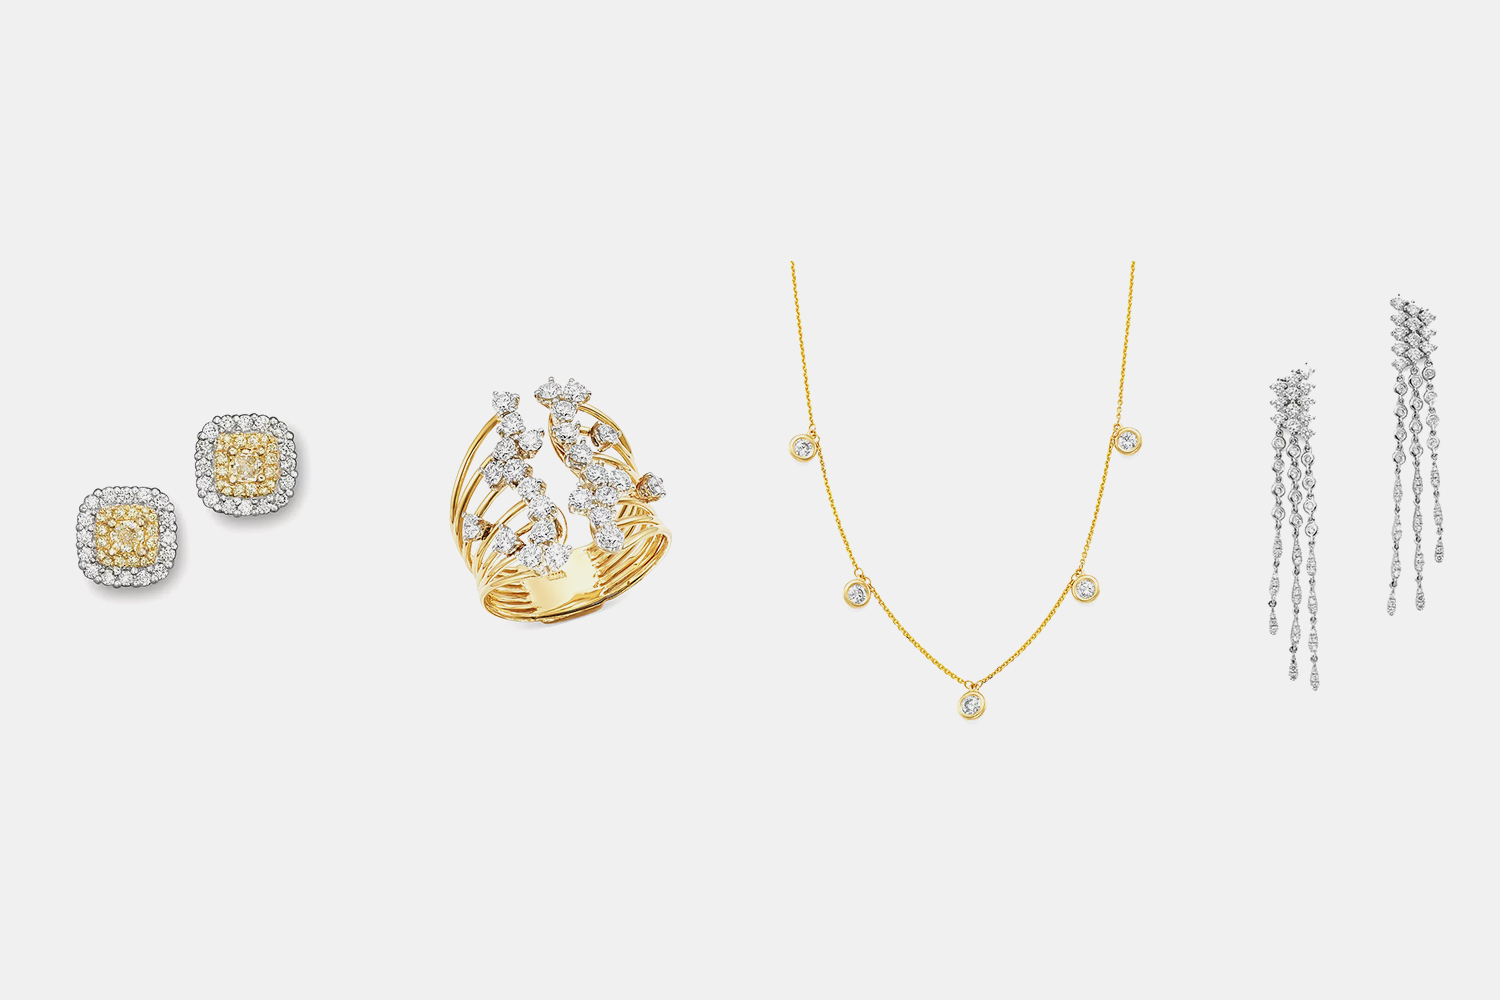 The Jewelry to Buy a Woman, According to Actual Women